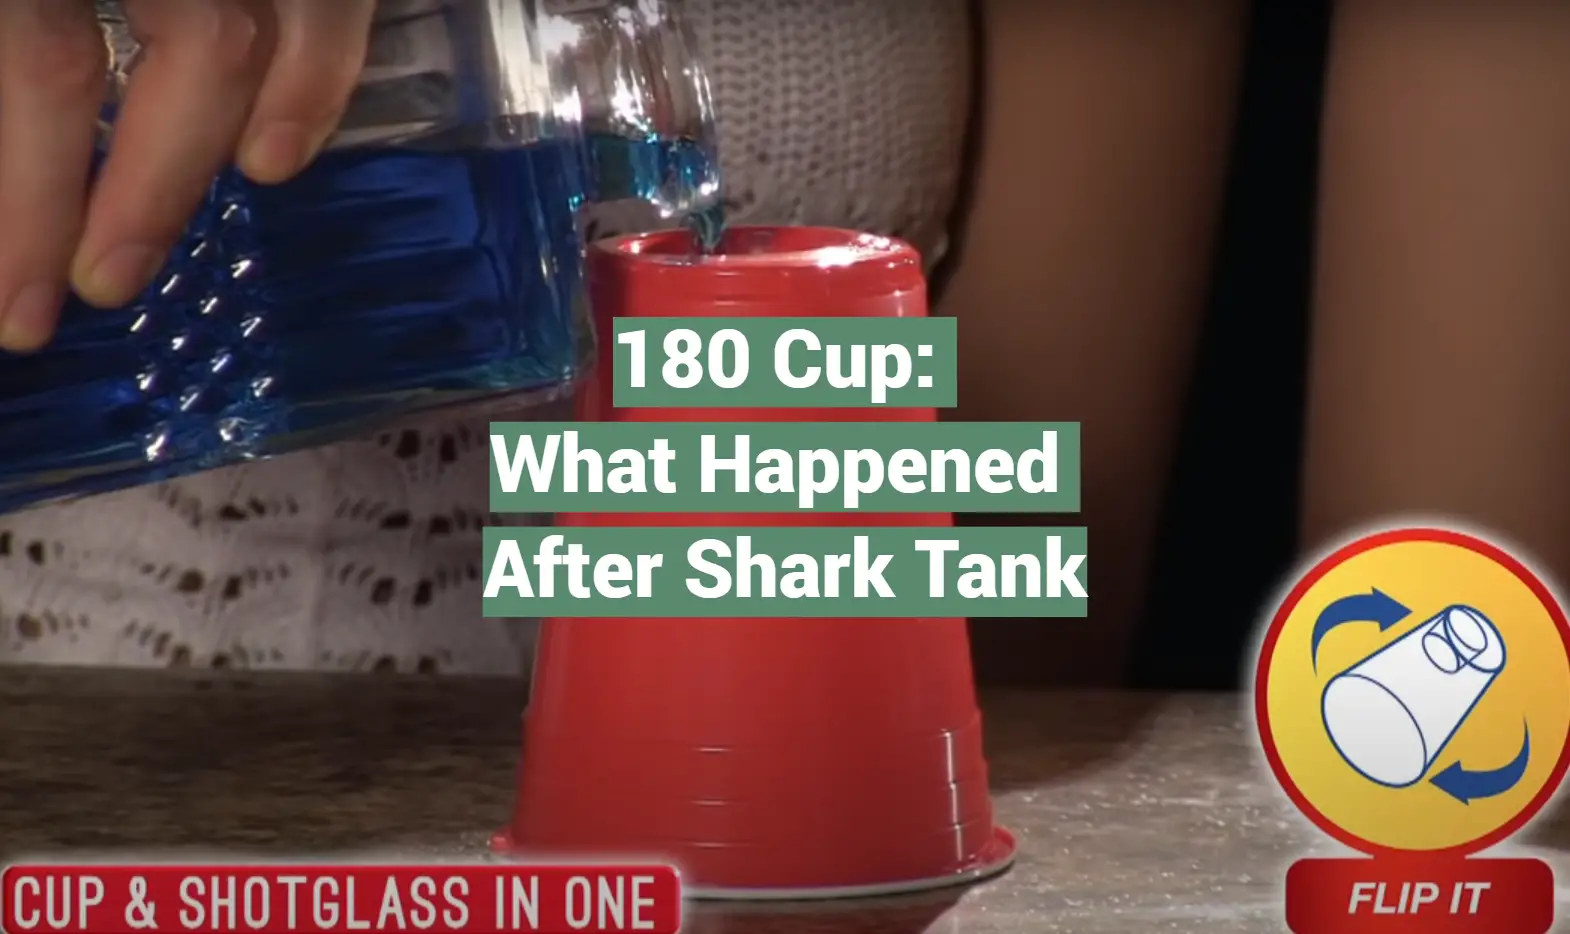 180 Cup: What Happened After Shark Tank